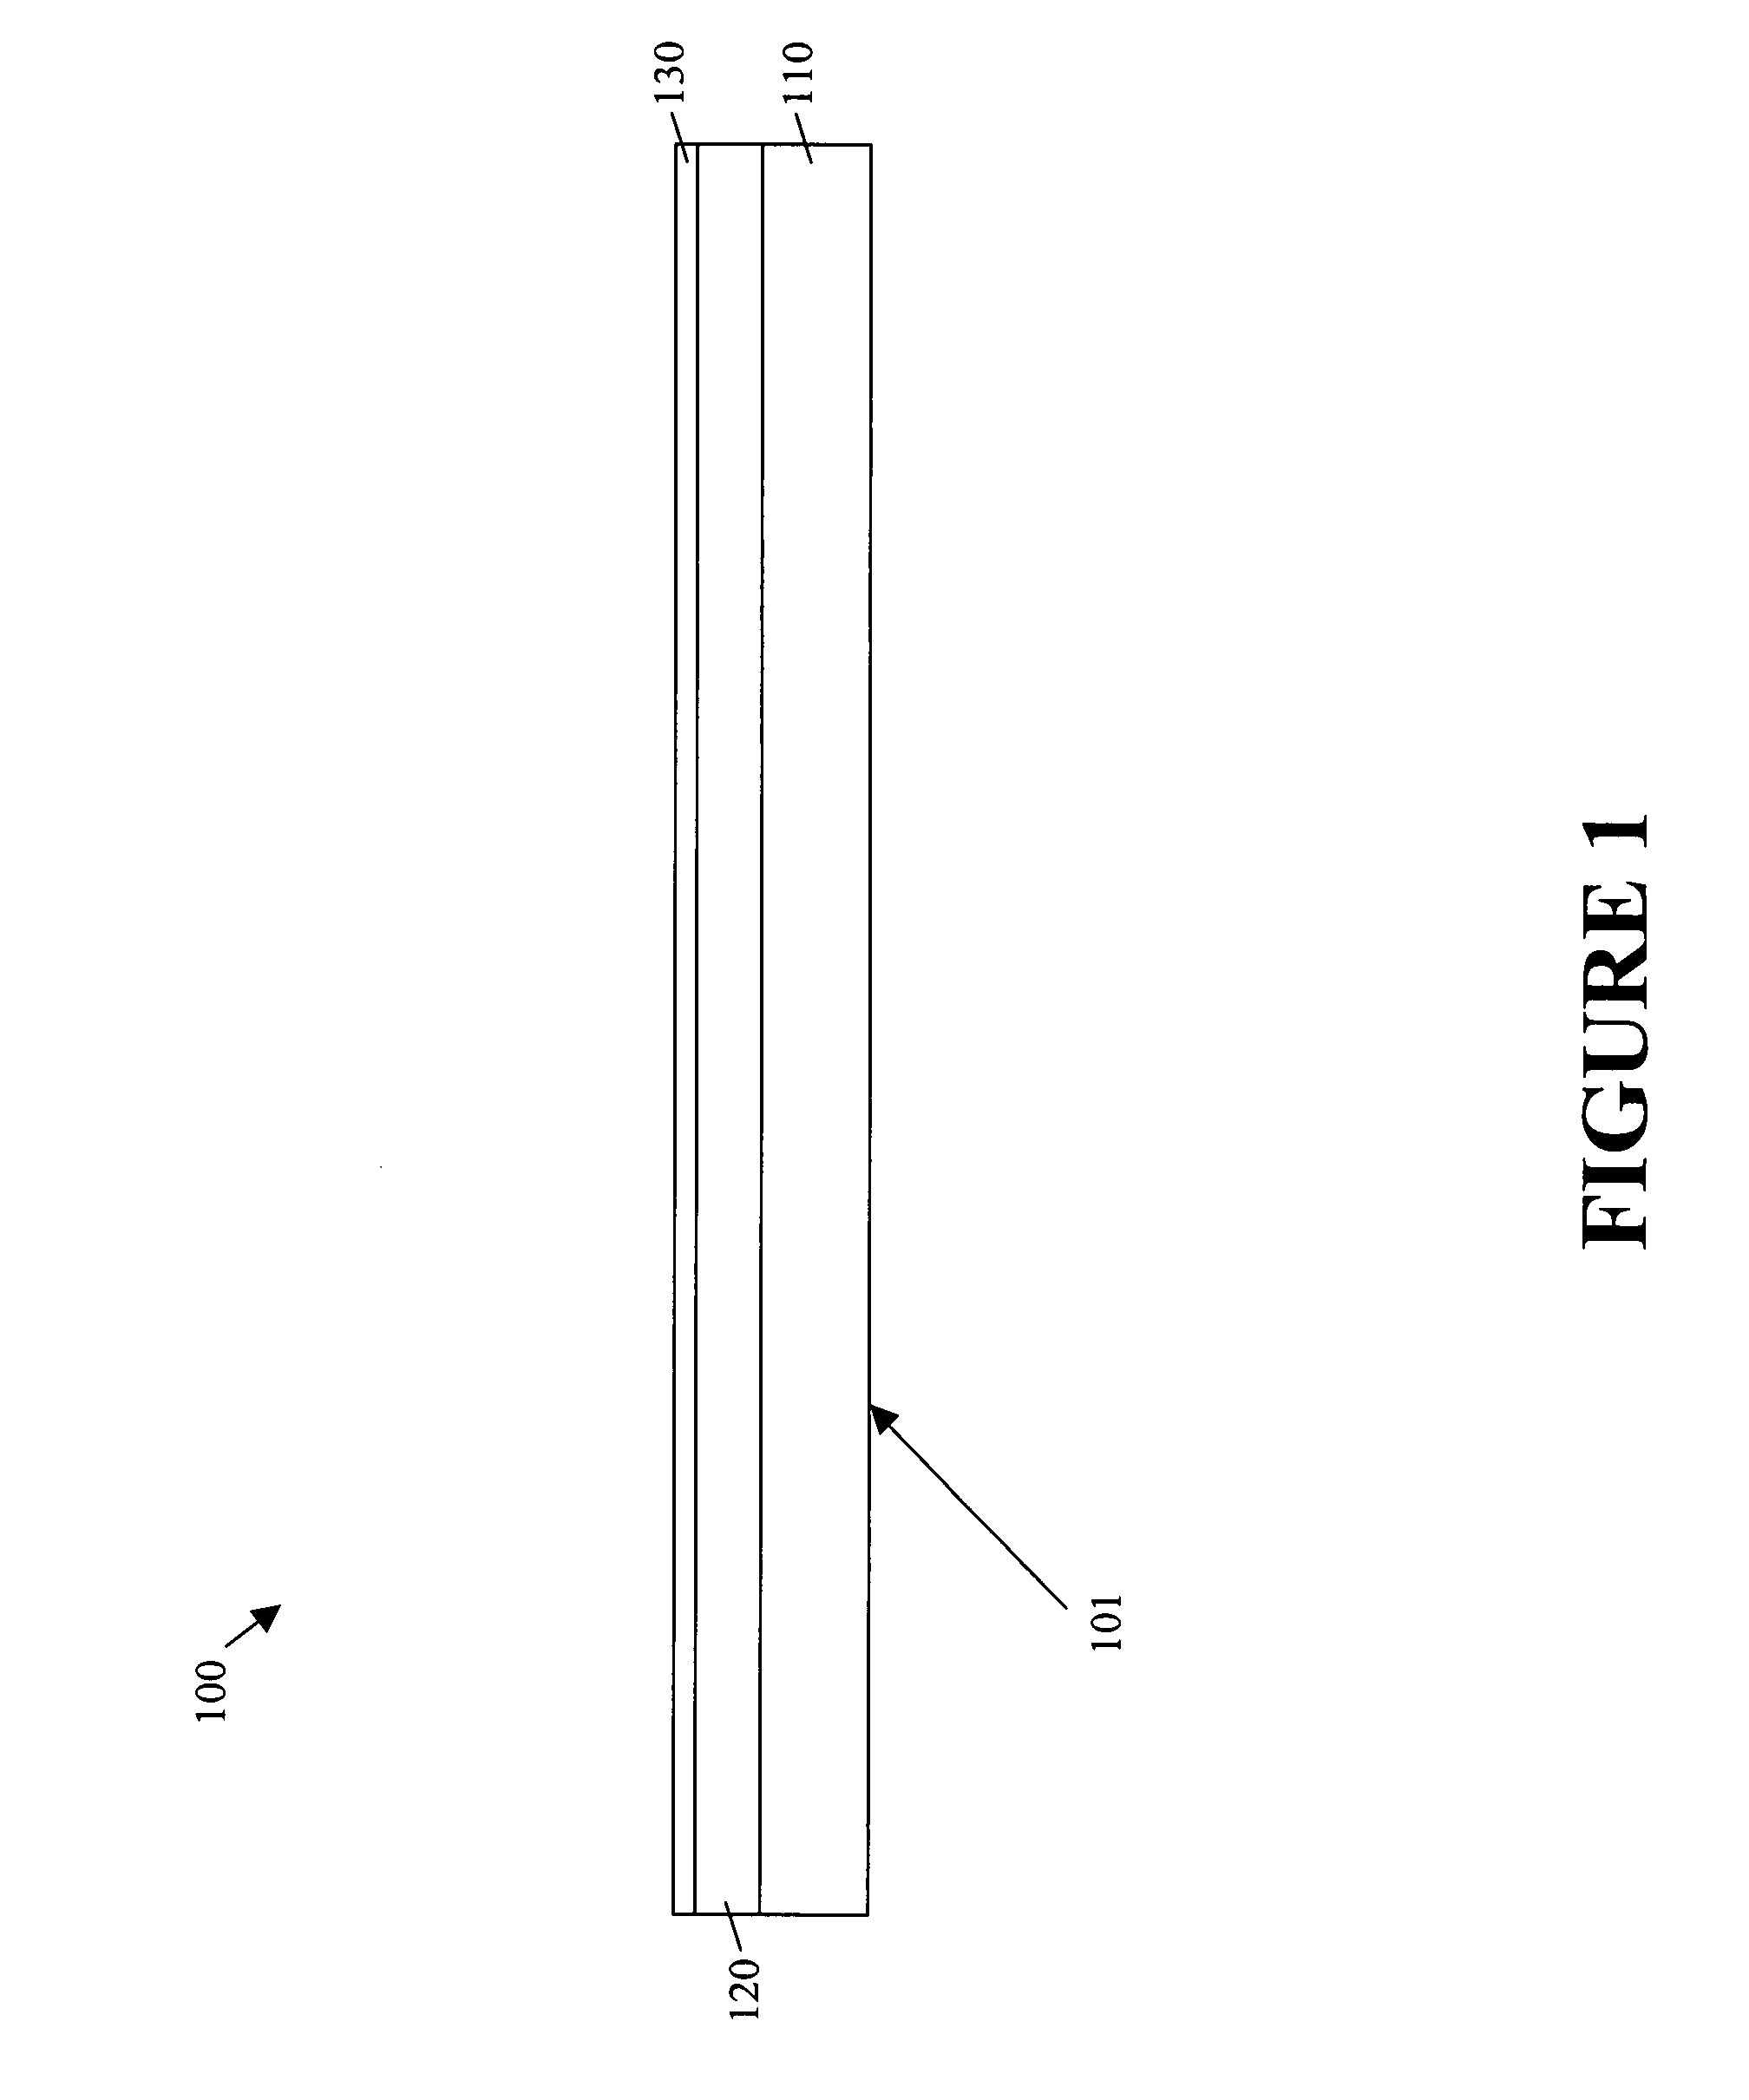 Back contact device for photovoltaic cells and method of manufacturing a back contact device